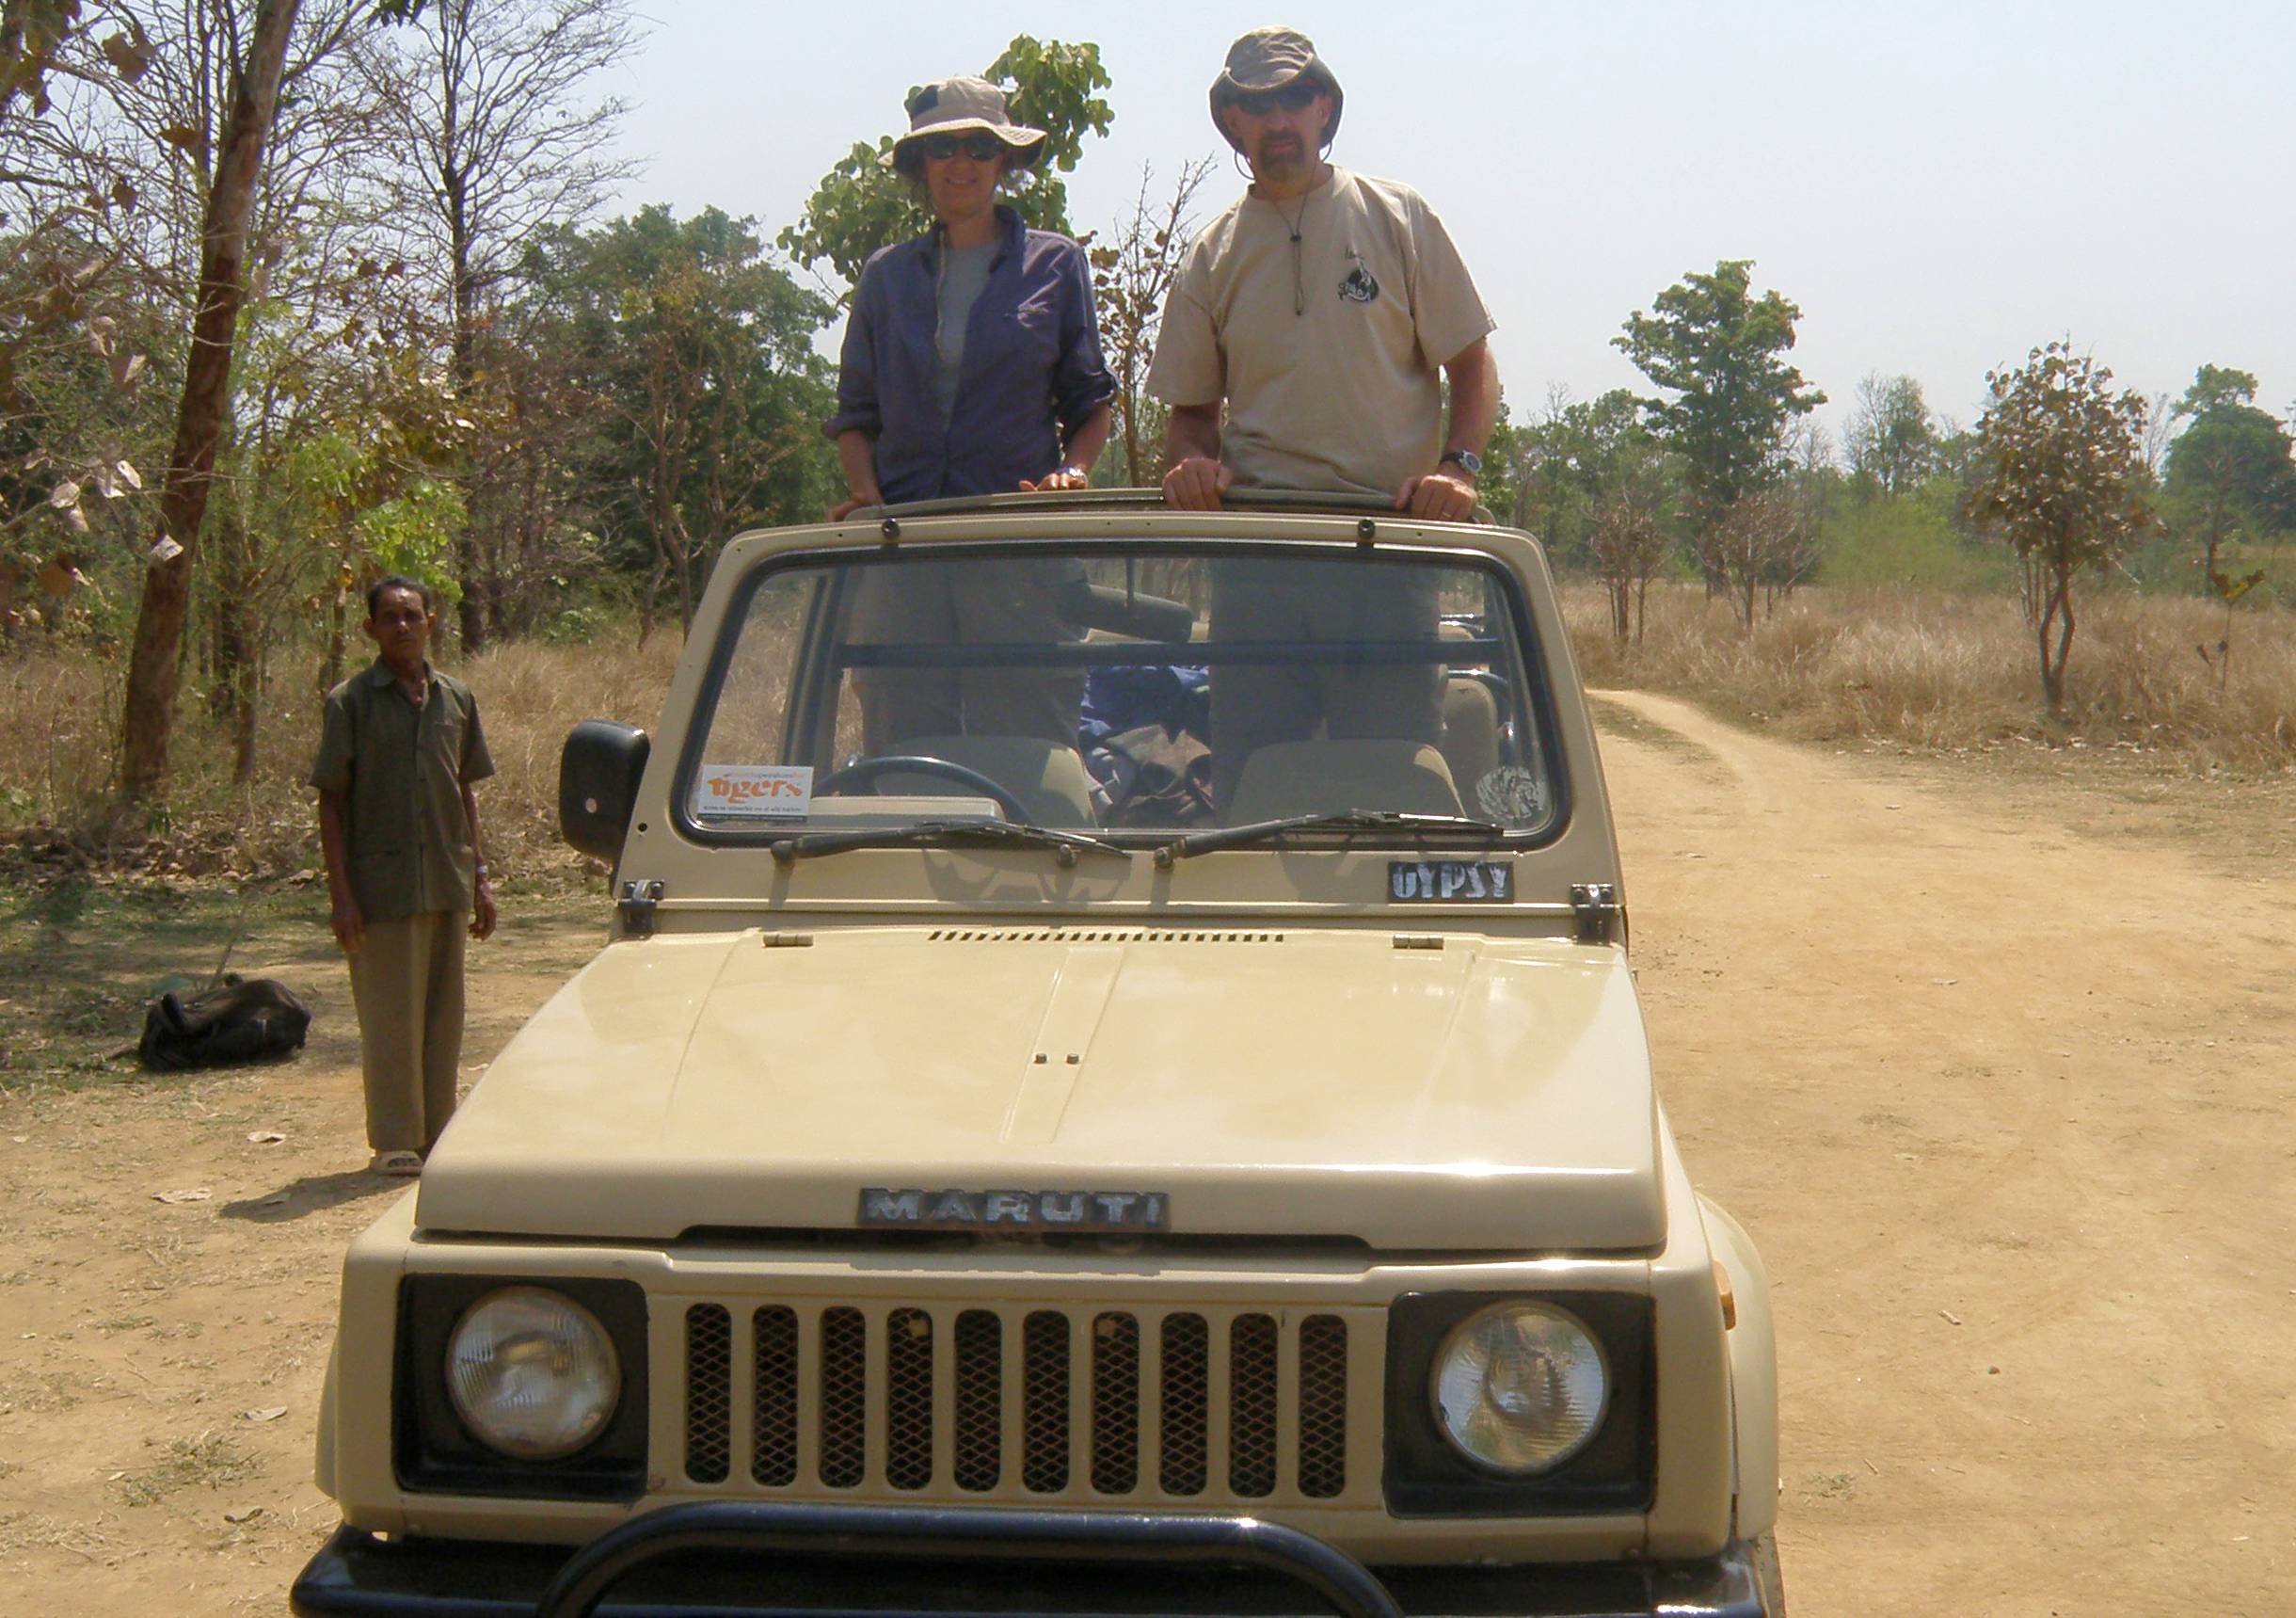 Our jeep in Kanha